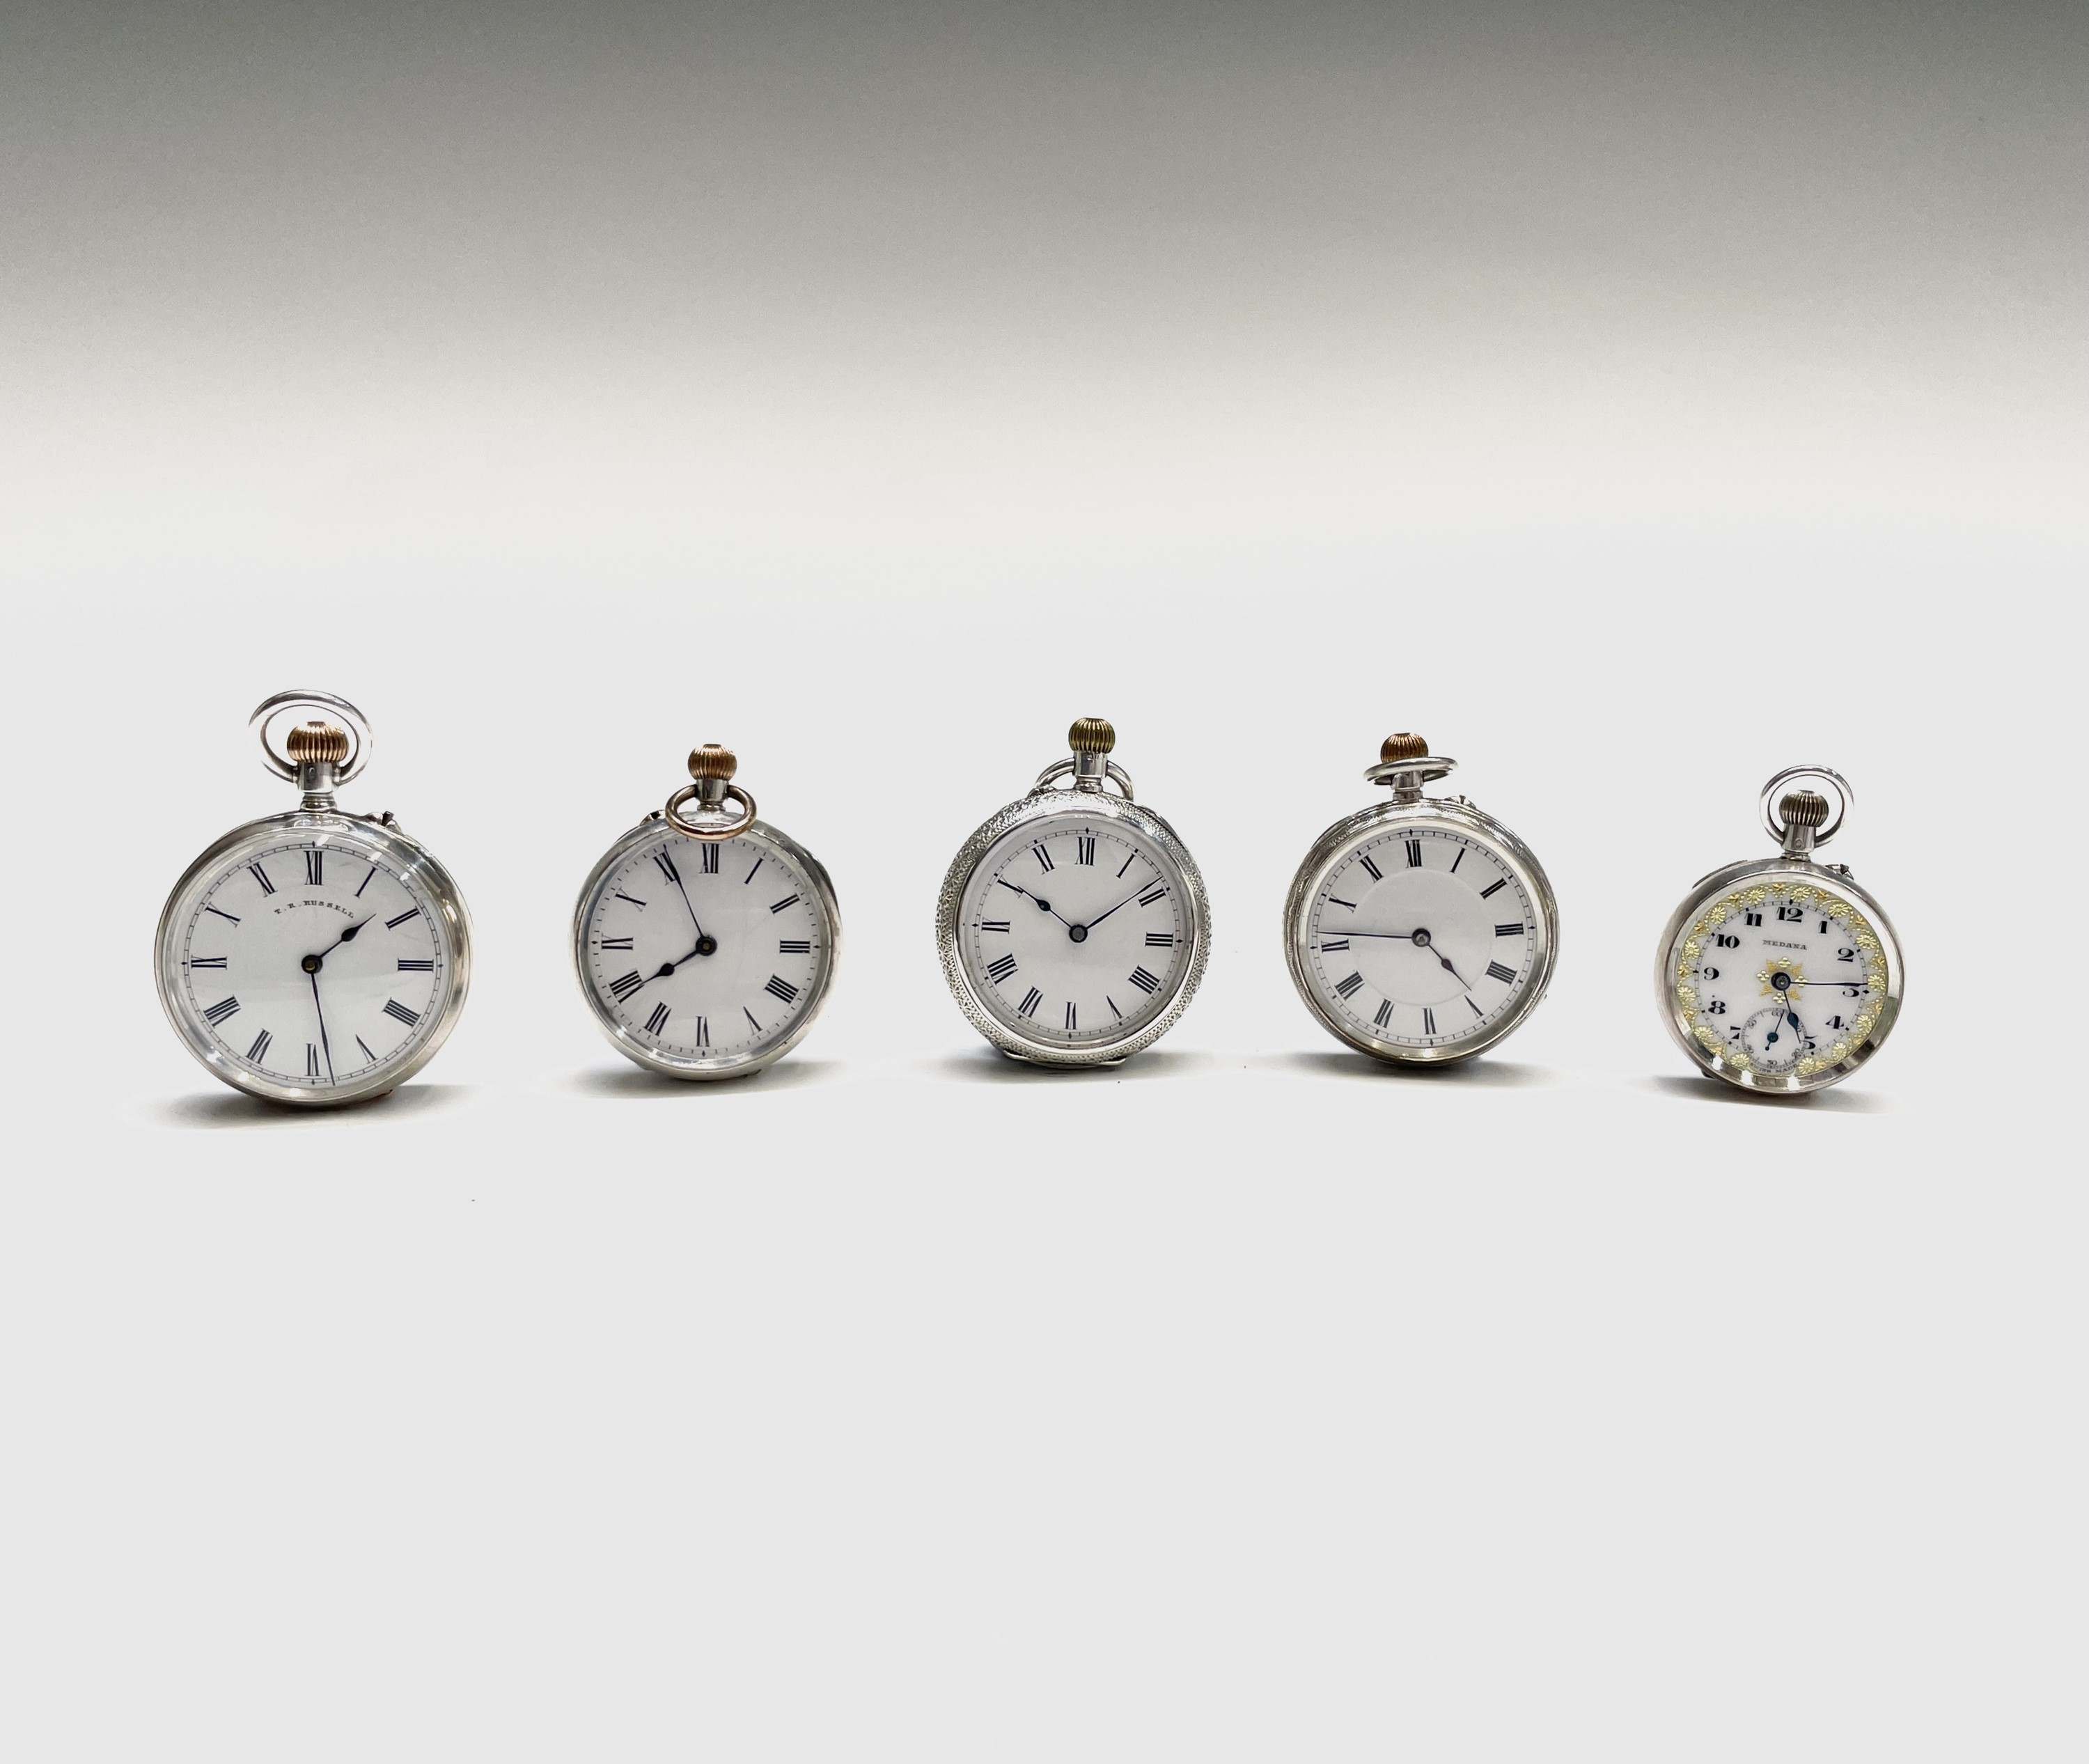 Four silver keyless fob watches with white open dials, including one by Russell together, all